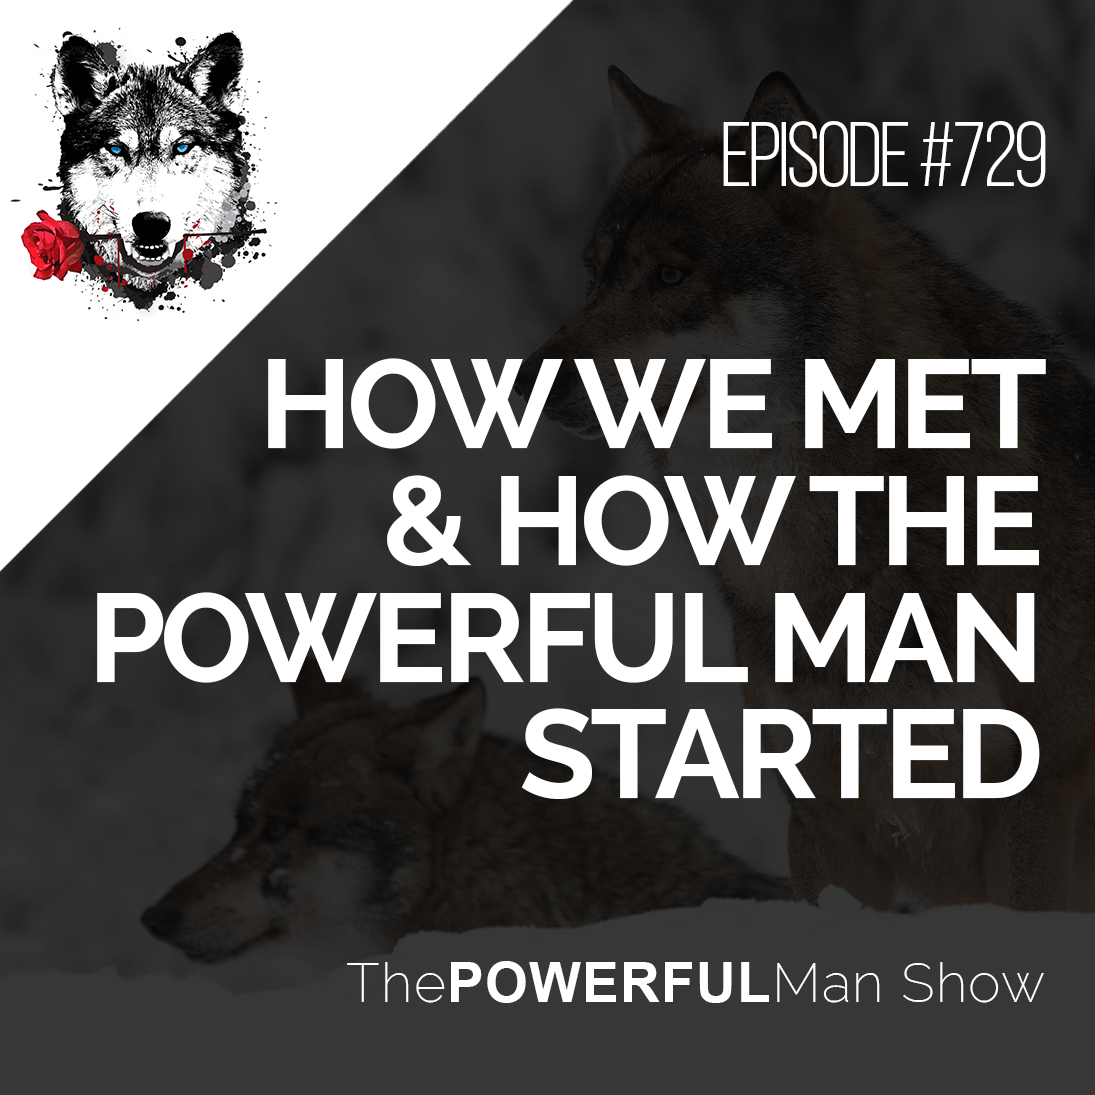 How We Met & How The Powerful Man Started